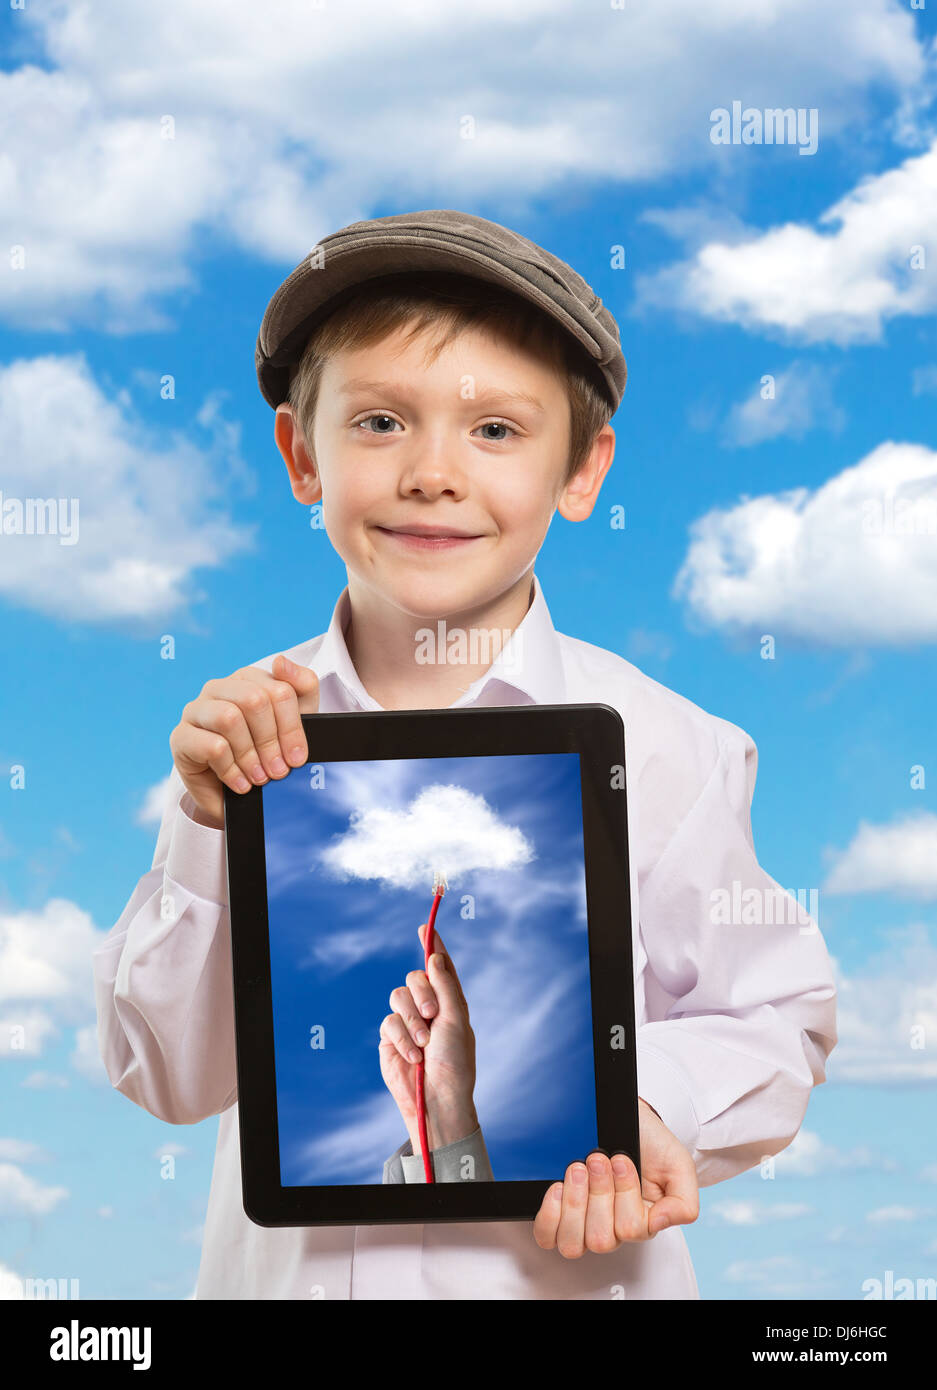 Happy boy with tablet computer. Child showing tablet Stock Photo